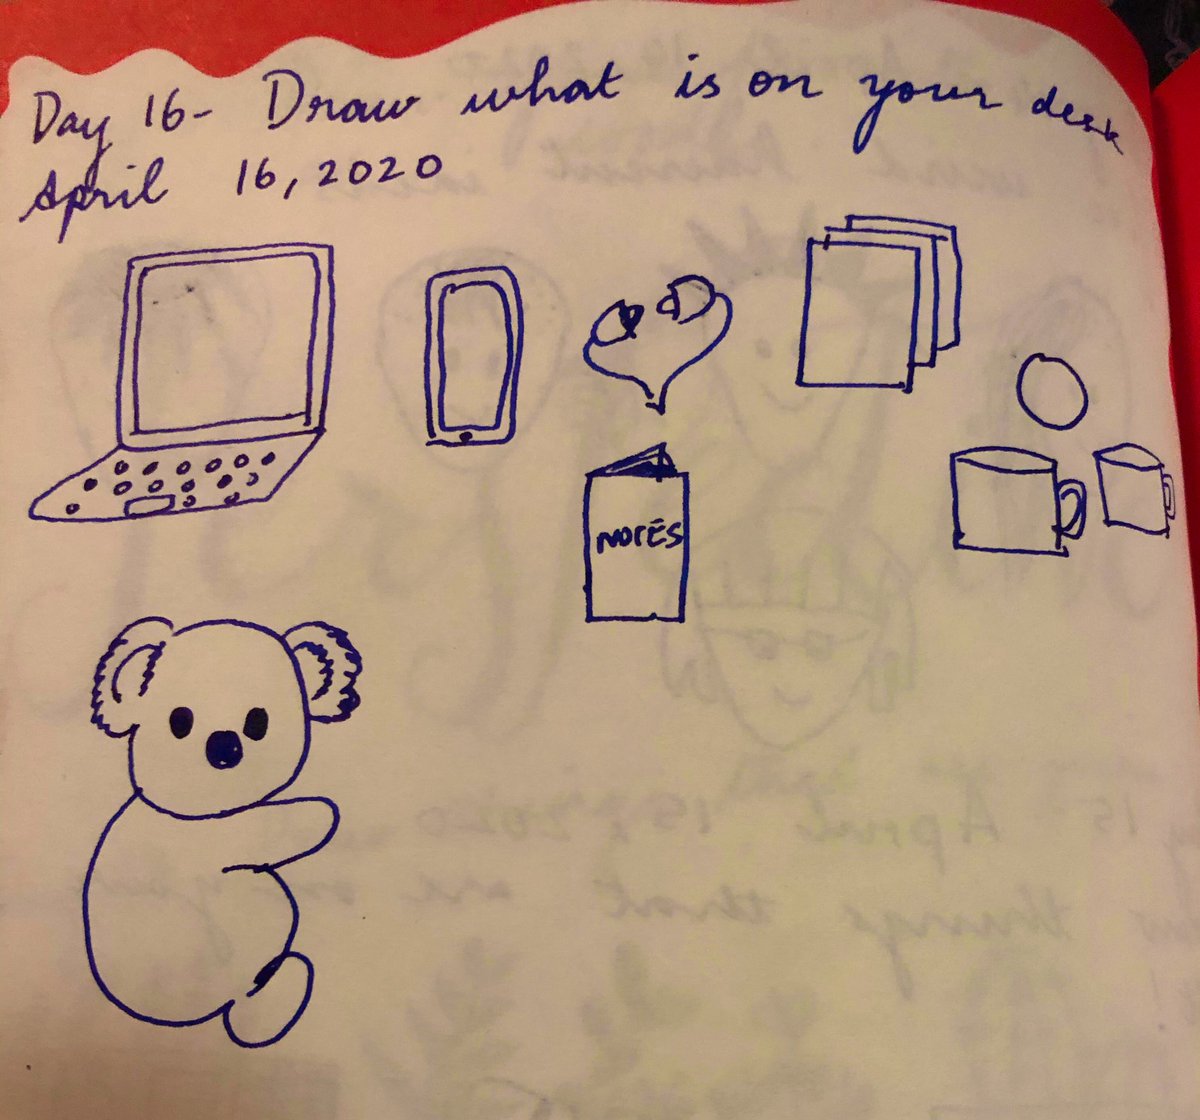 Day 16: Draw the things on your deskLaptop, phone, earphones, books and loose sheets of paper, many tea mugs with tea residue drying up, a ball and a koala bear (my children’s. Not mine )